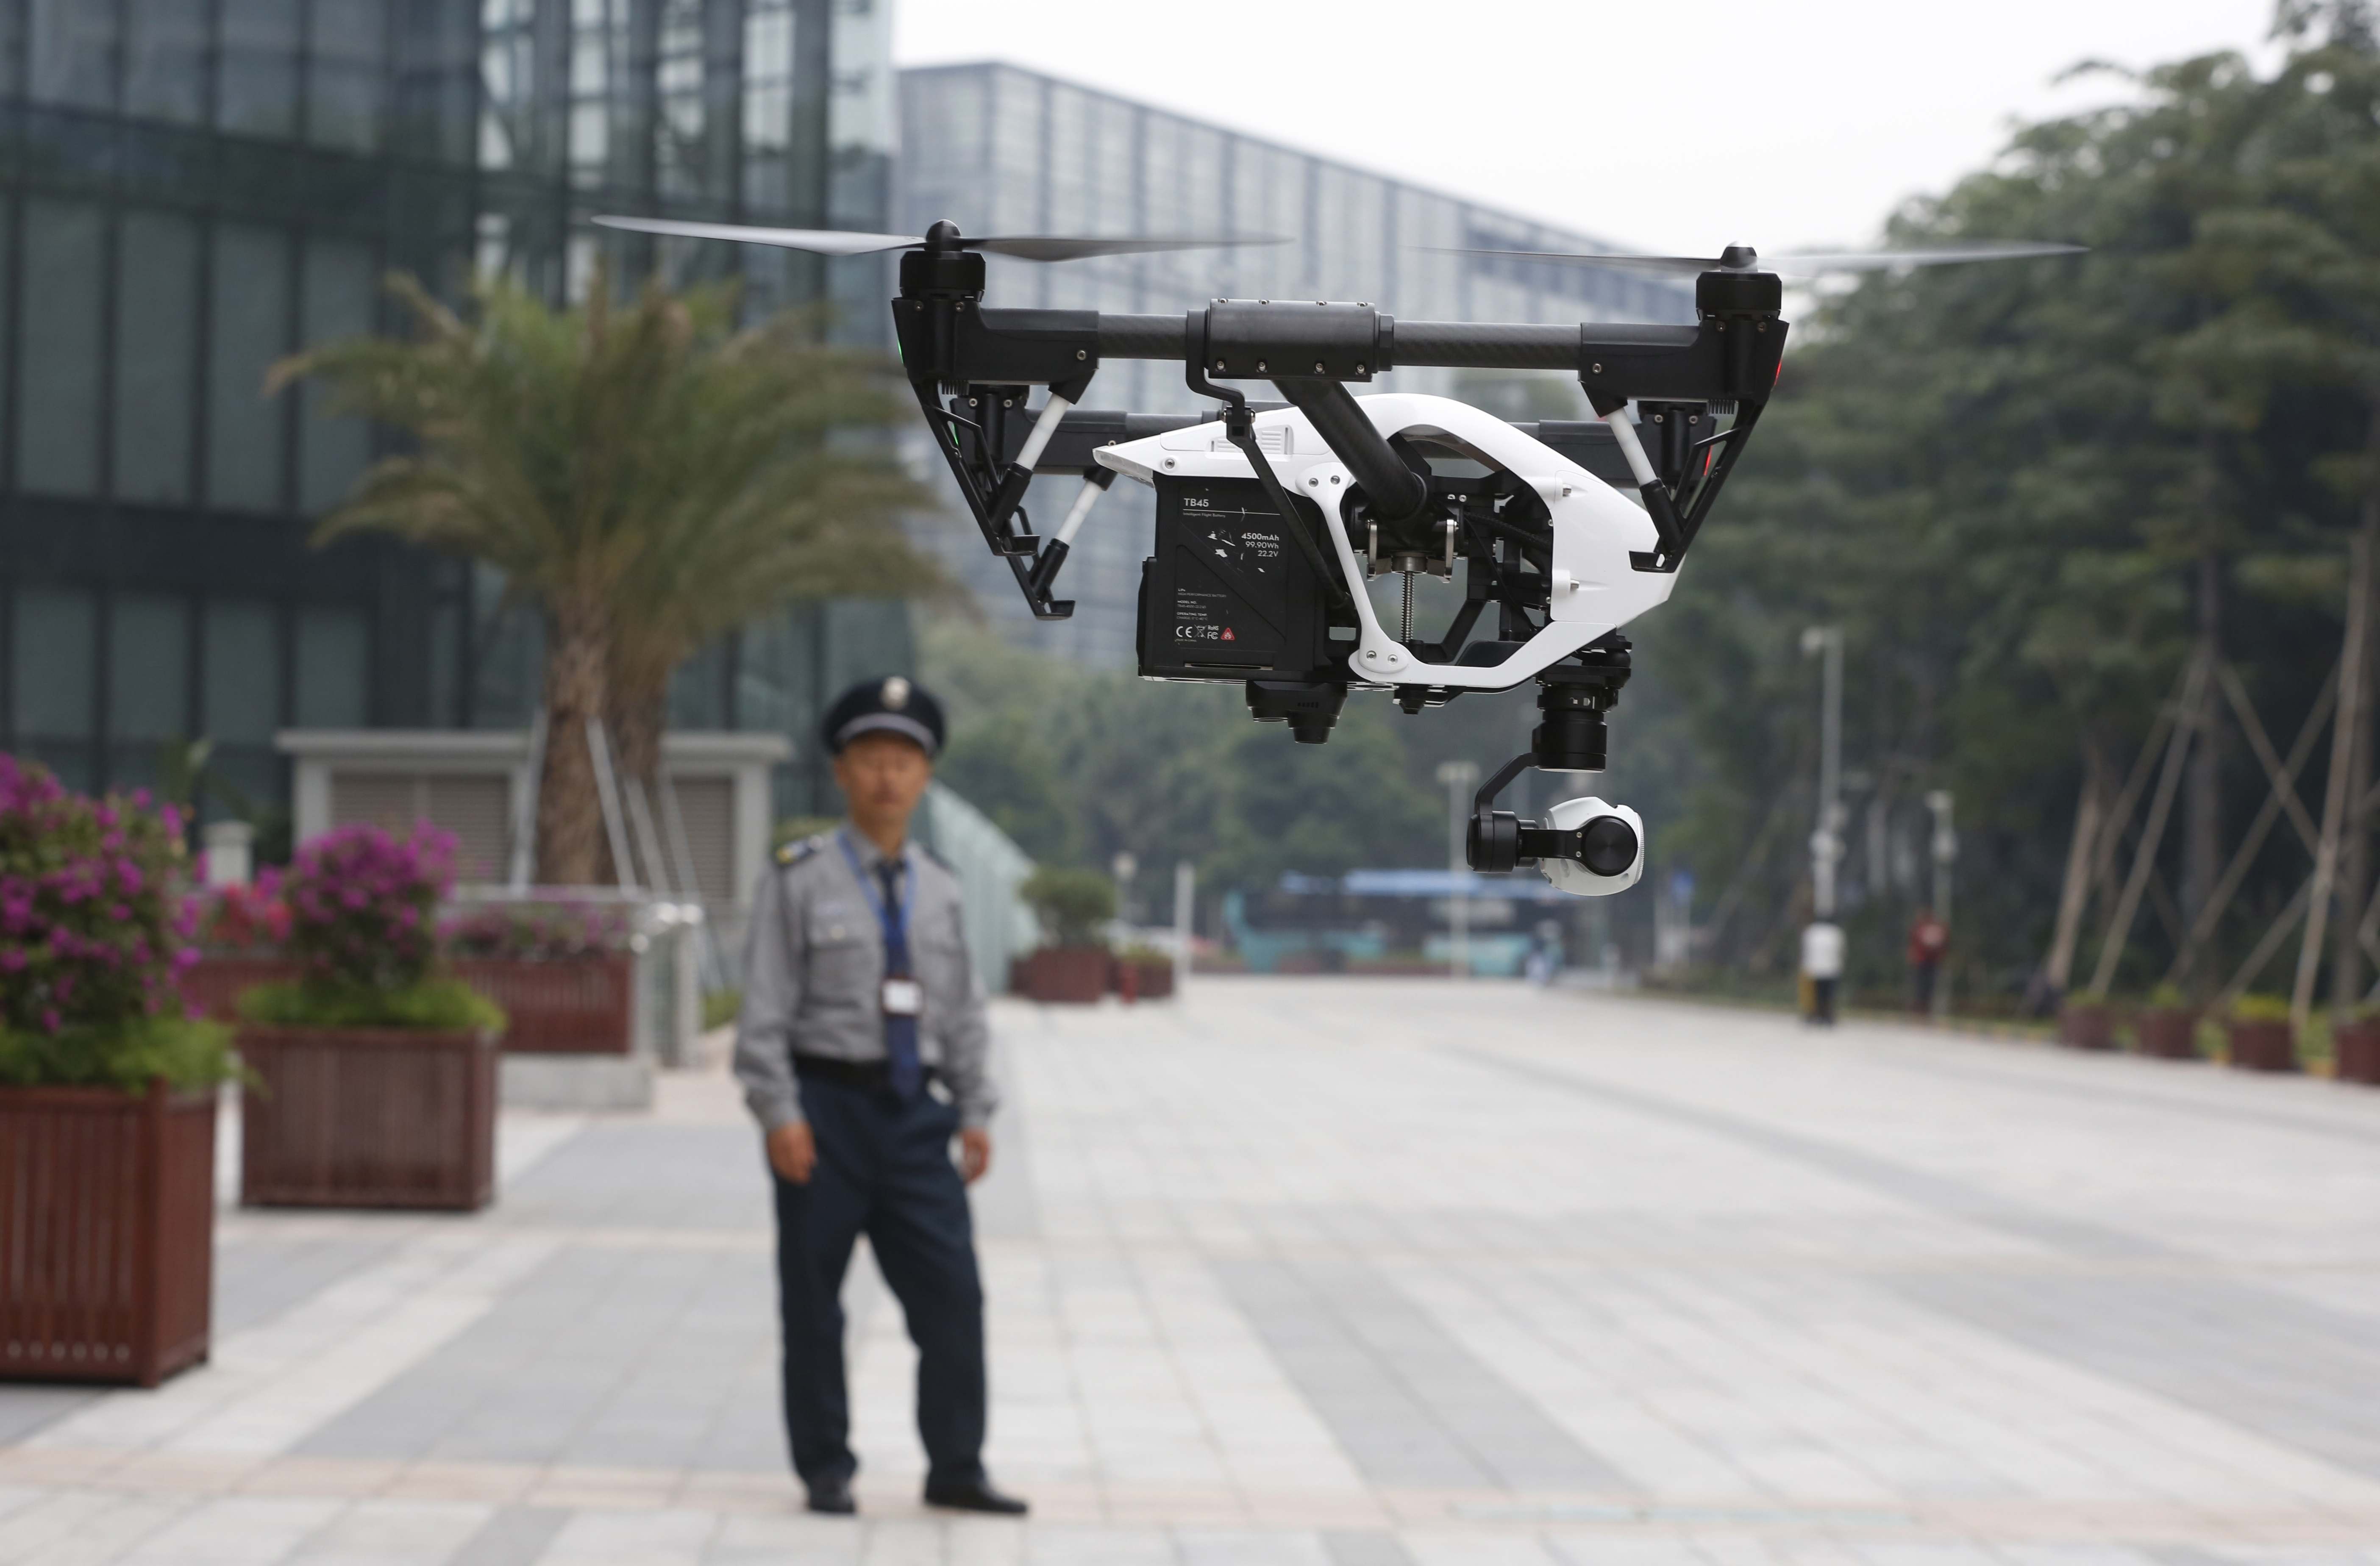 Citizens of China will have to register their drones starting 1st of June